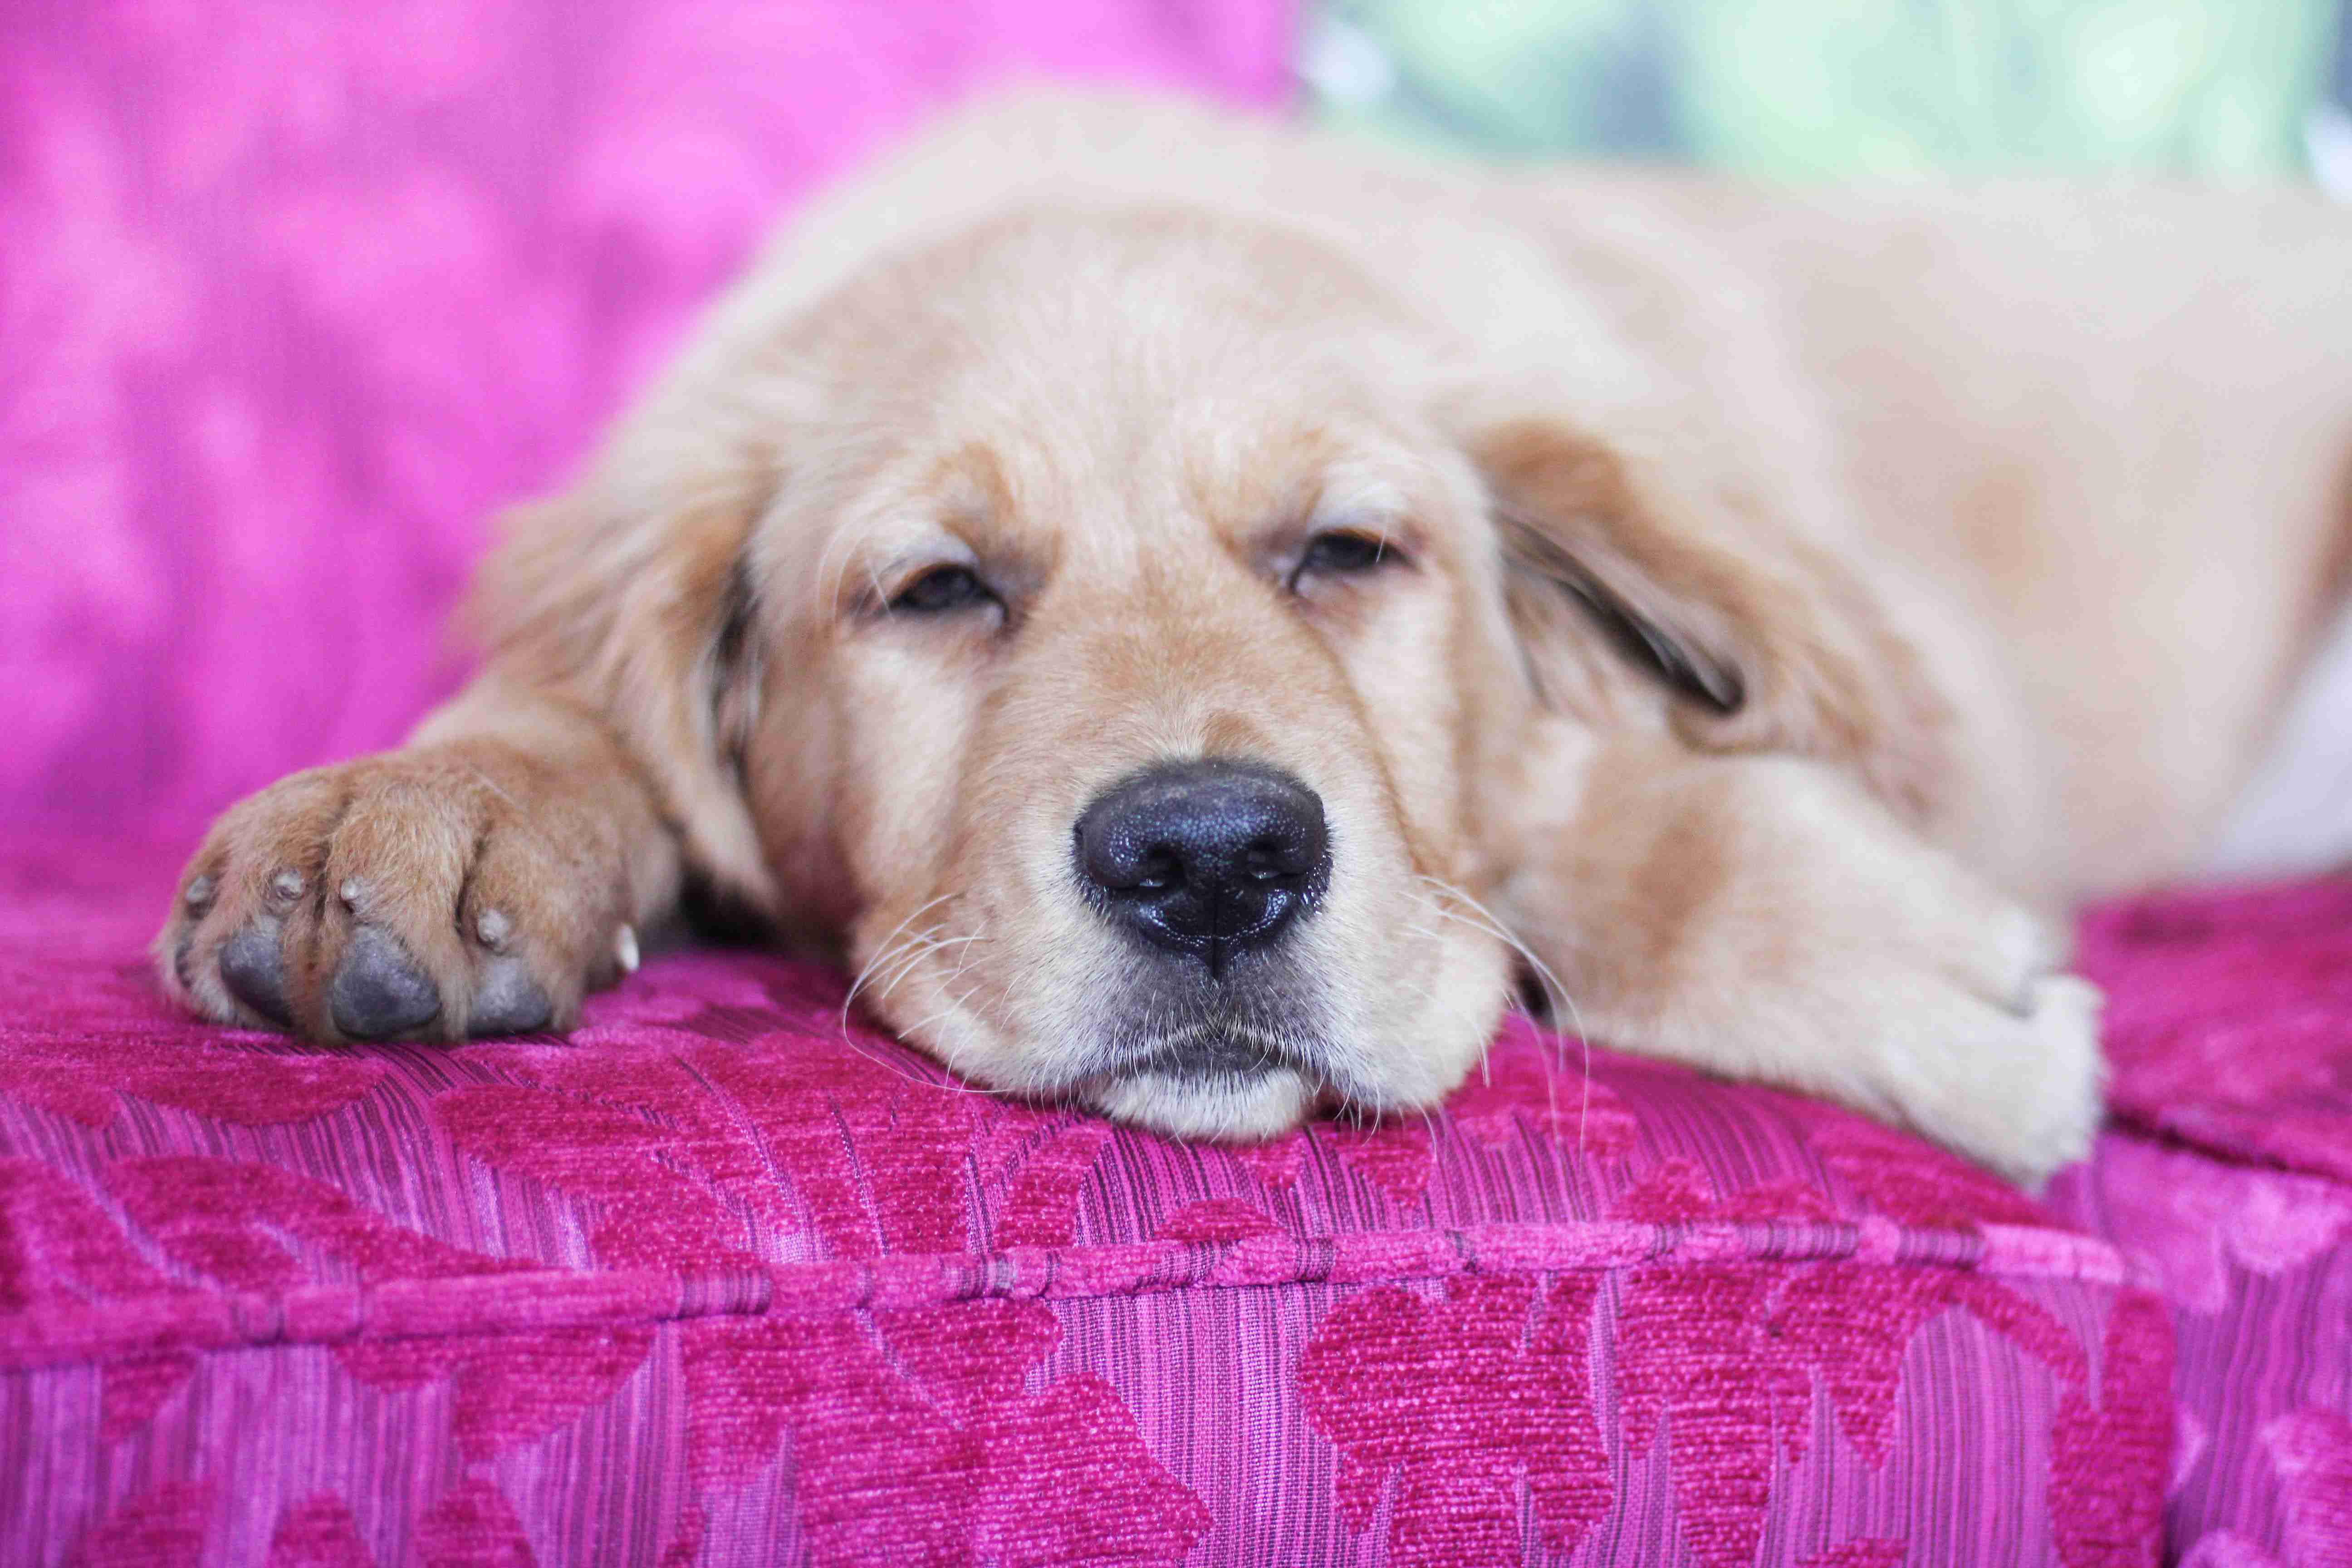 How can I prevent my Golden Retriever from developing kidney disease?